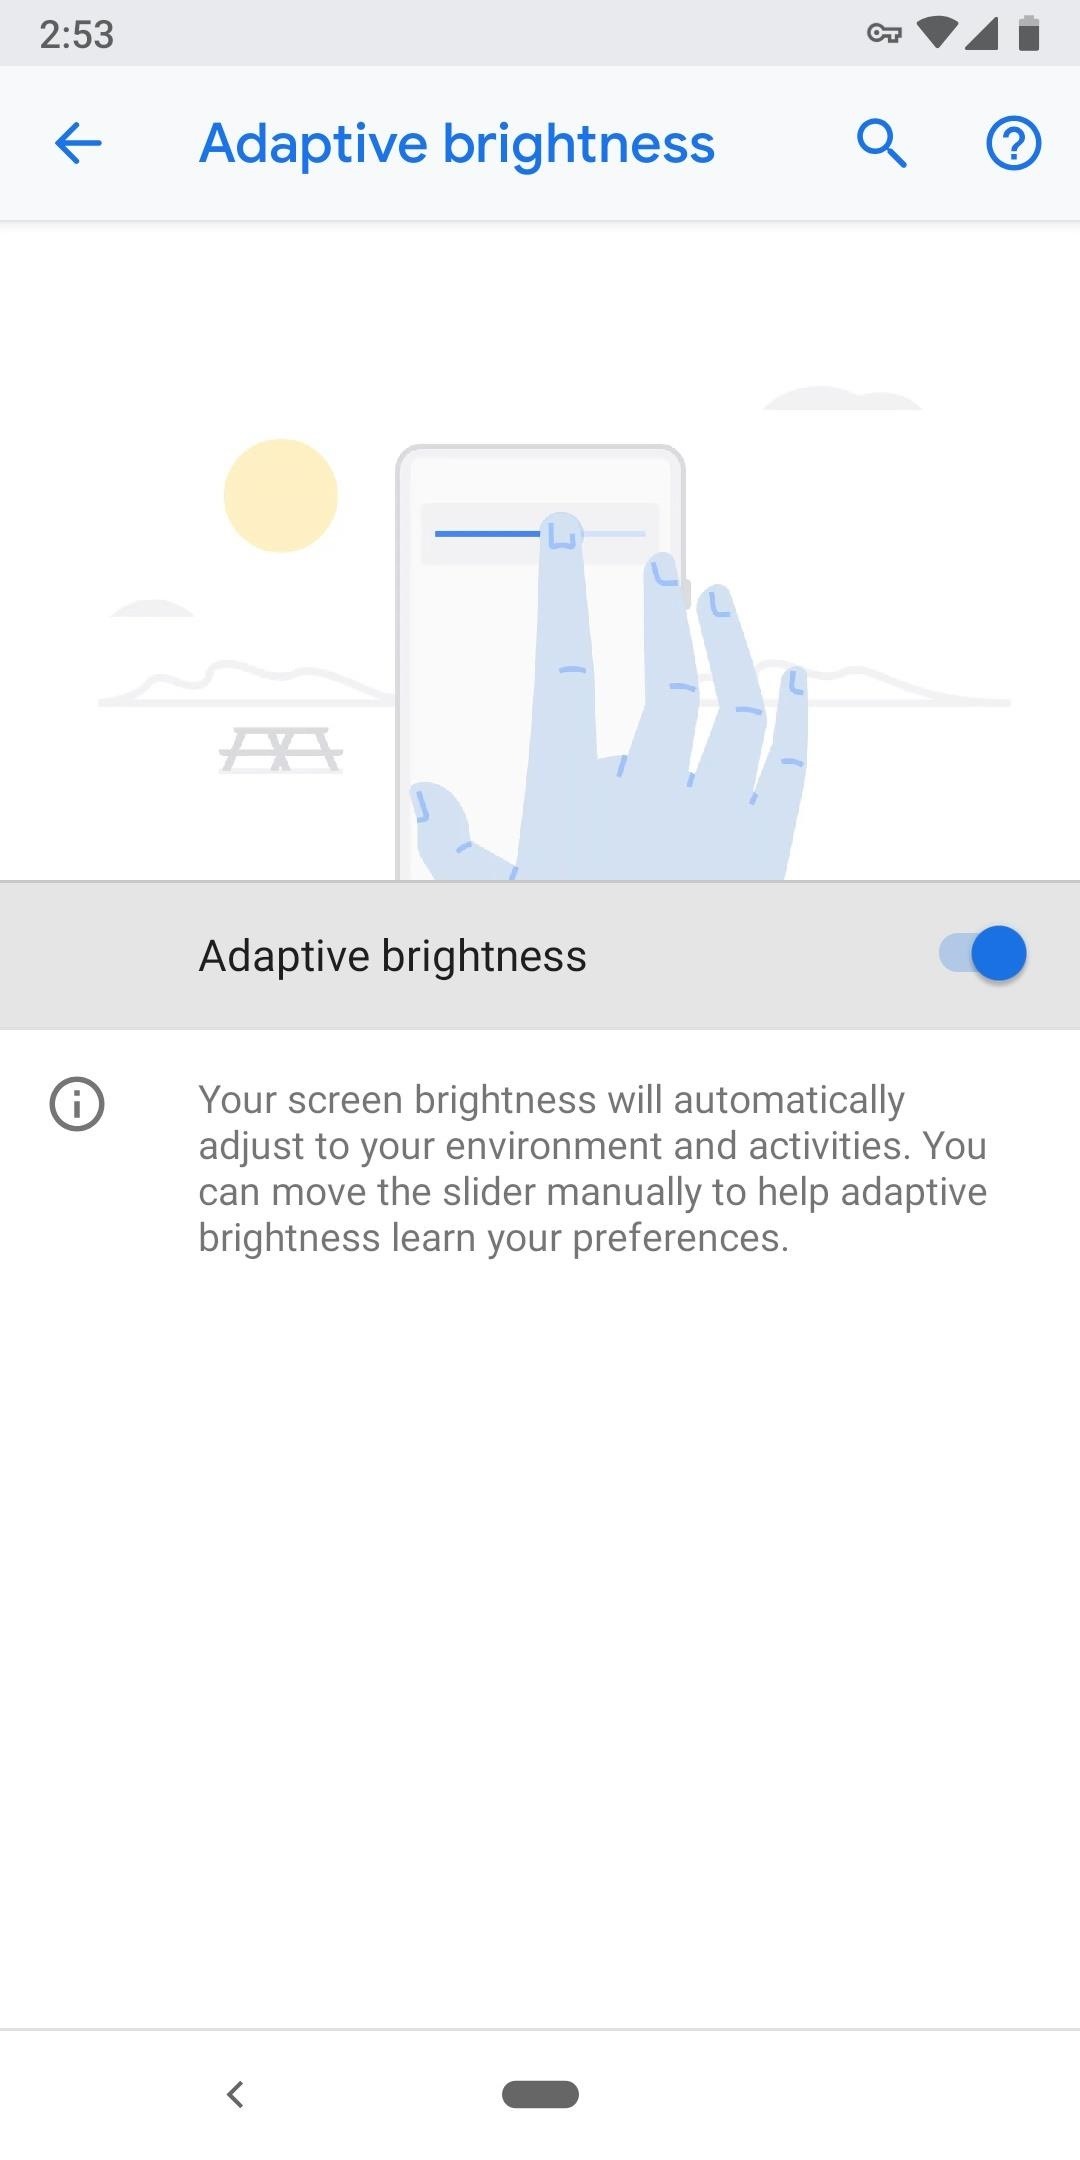 15 Tips & Tricks for New Pixel 3 Users